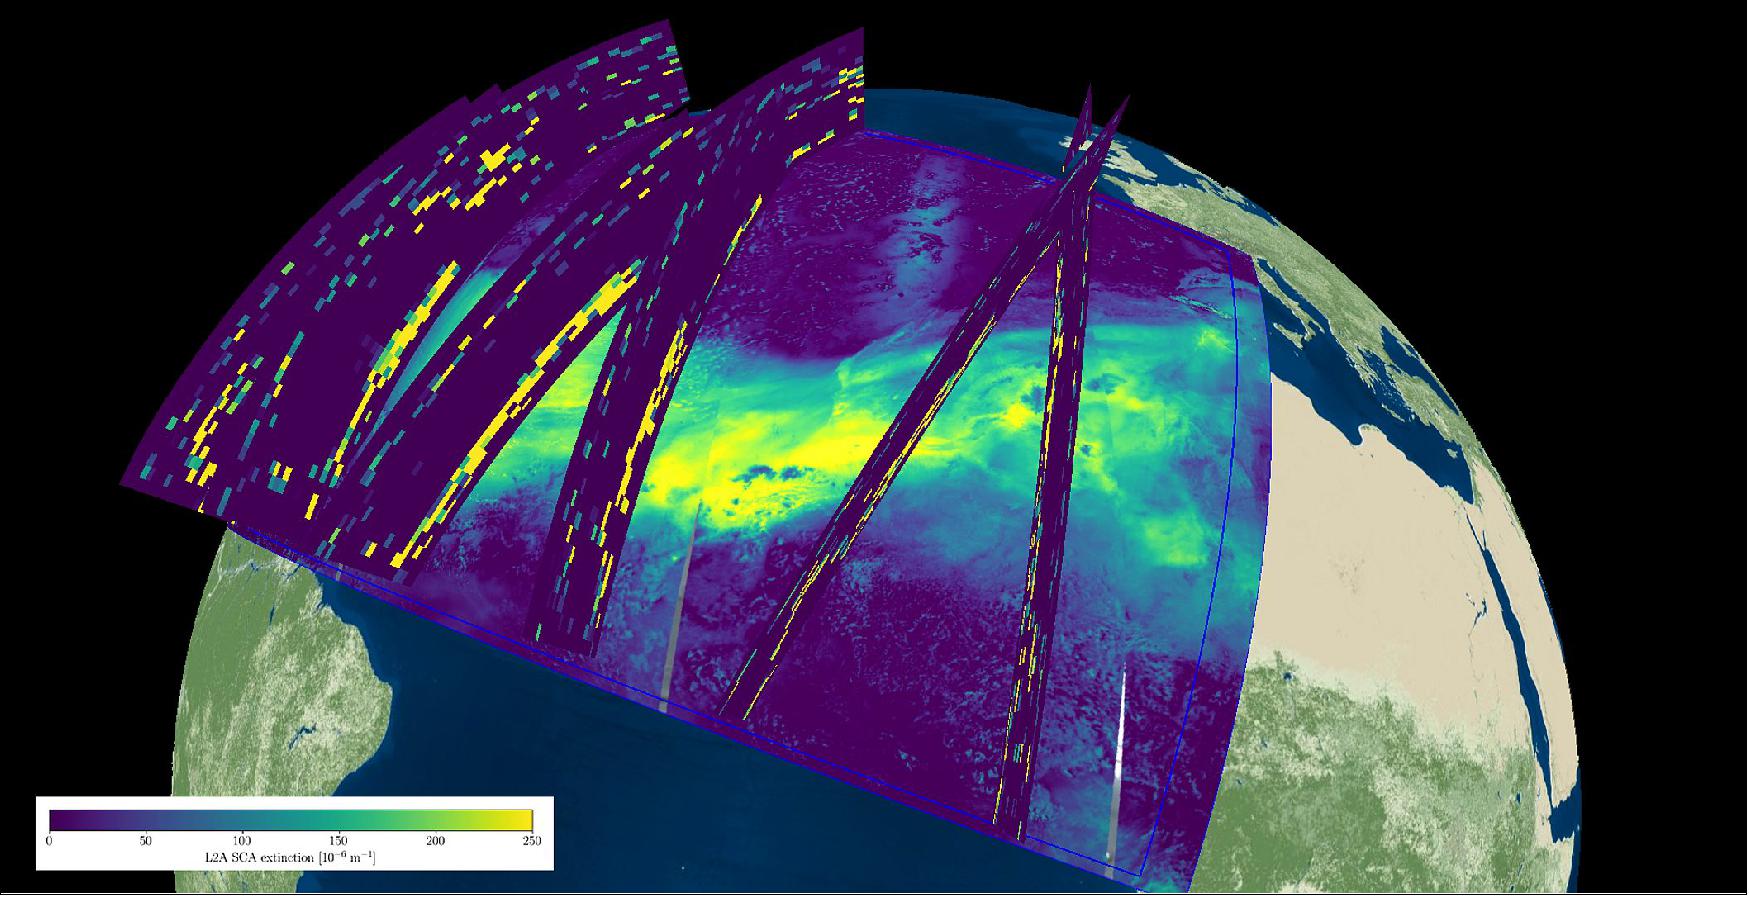 Figure 59: This composite image shows combined observations from the Aeolus satellite and the Copernicus Sentinel-5P satellite on 19 June 2020. The underlying Sentinel-5P aerosol index in florescent yellow and green, which indicates the extent of the elevated Saharan dust plume over the Atlantic, has been overlaid with information from Aeolus' aerosol and cloud data. In yellow, parts of the laser light are scattered and absorbed by the Saharan dust (image credit: ESA, the image contains Copernicus and Aeolus data (2020), visualized with VirES)